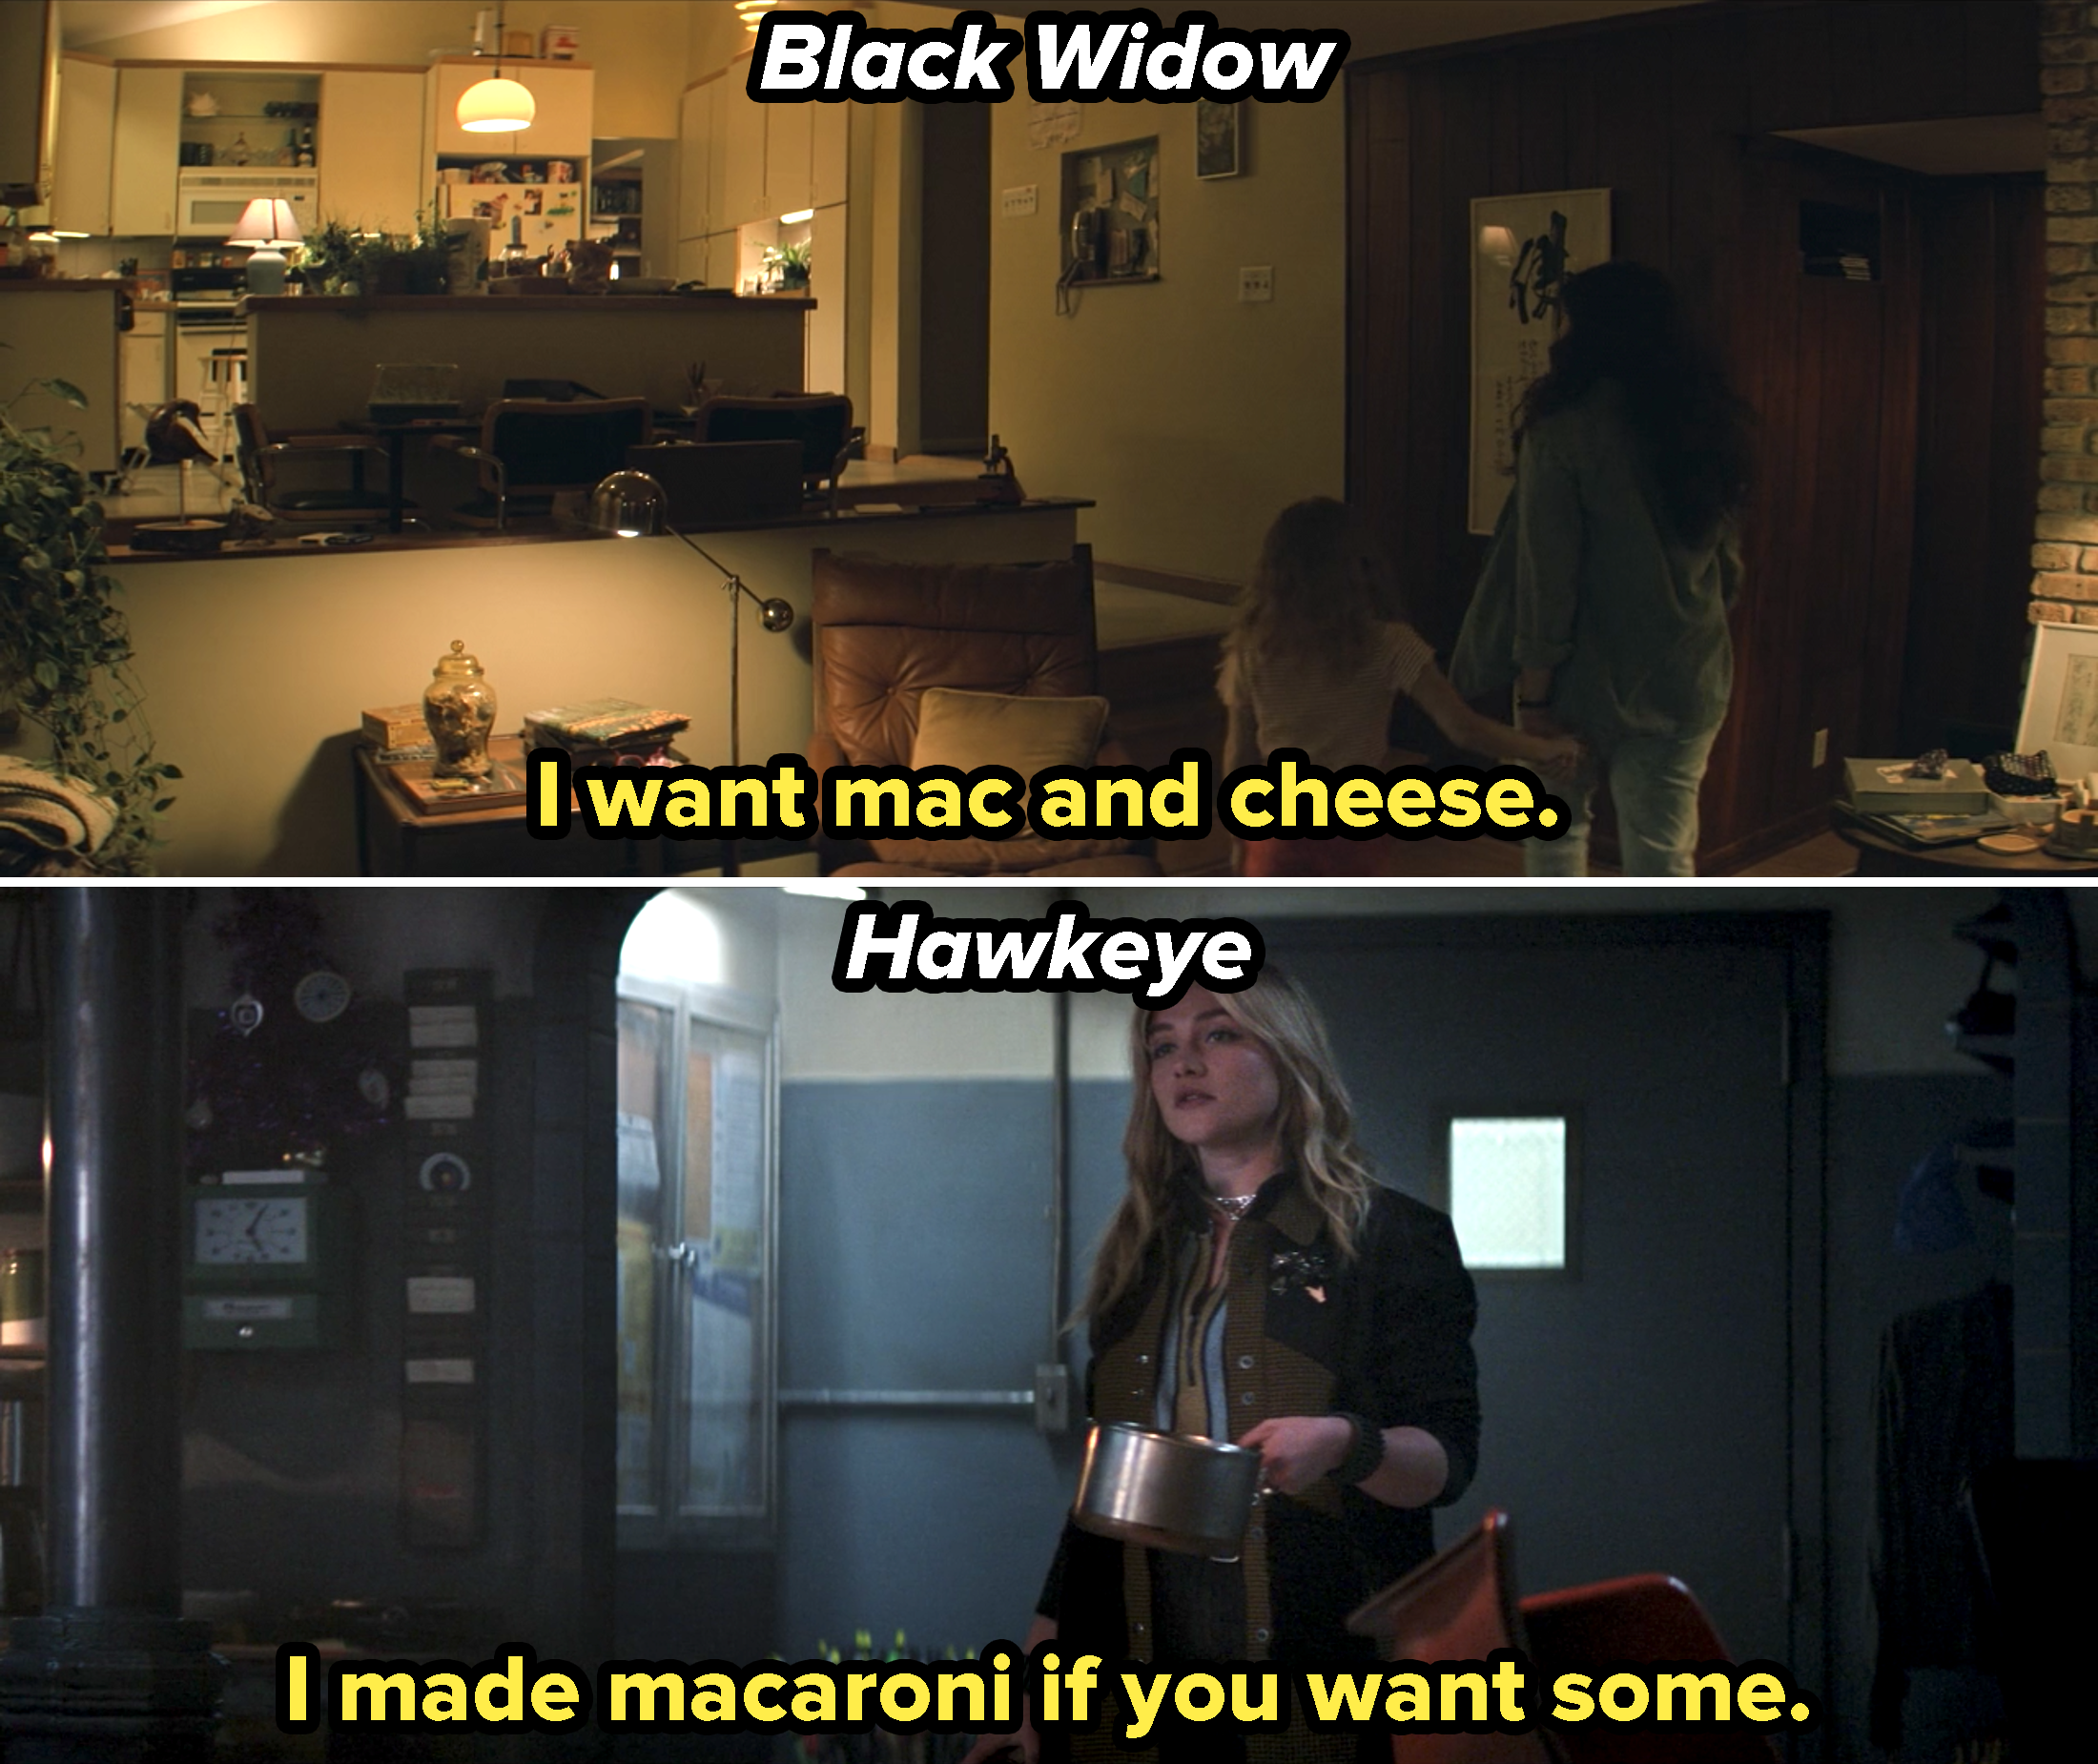 Yelena saying, &quot;I wan mac and cheese,&quot; in Black Widow, and &quot;I made macaroni if you want some,&quot; in Hawkeye